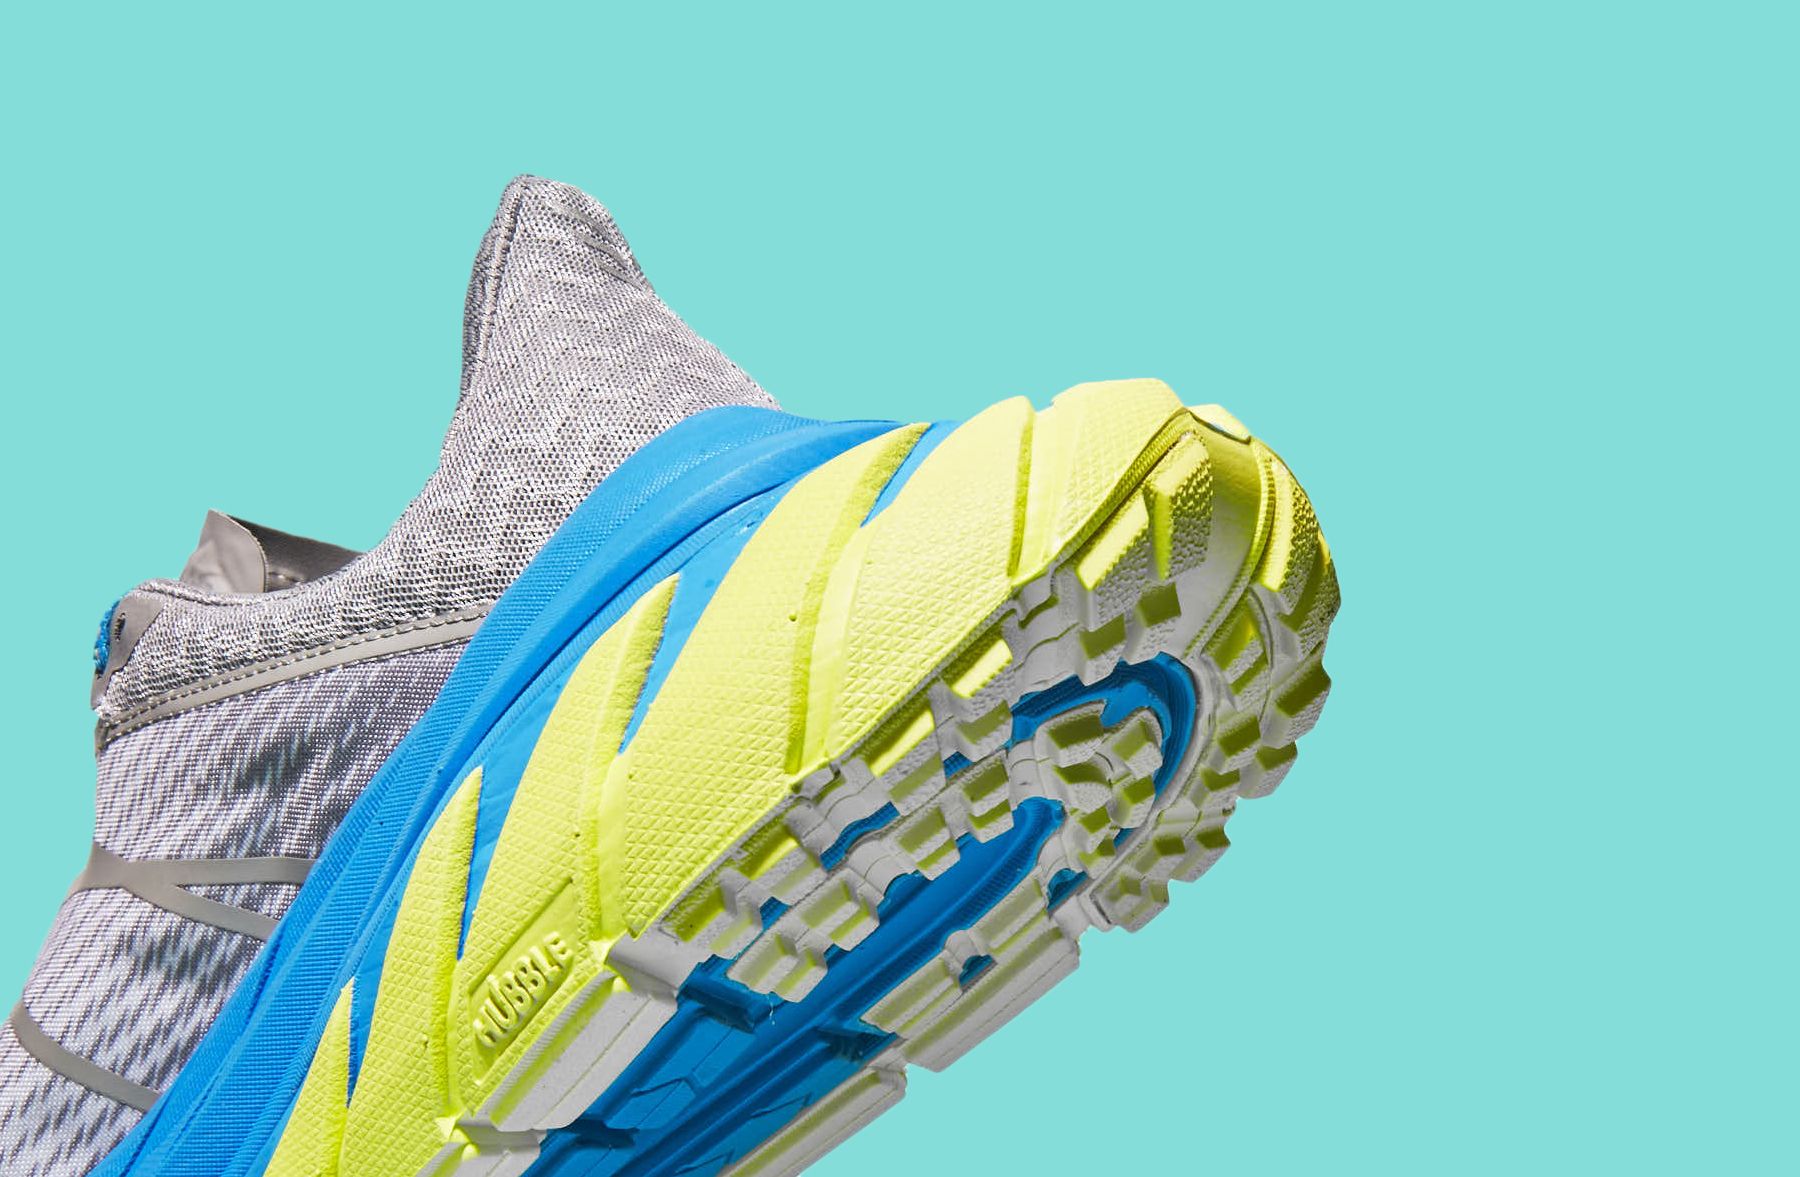 Hoka One One: A Great Choice for Orthotic-Friendly Shoes - Orthotics Direct